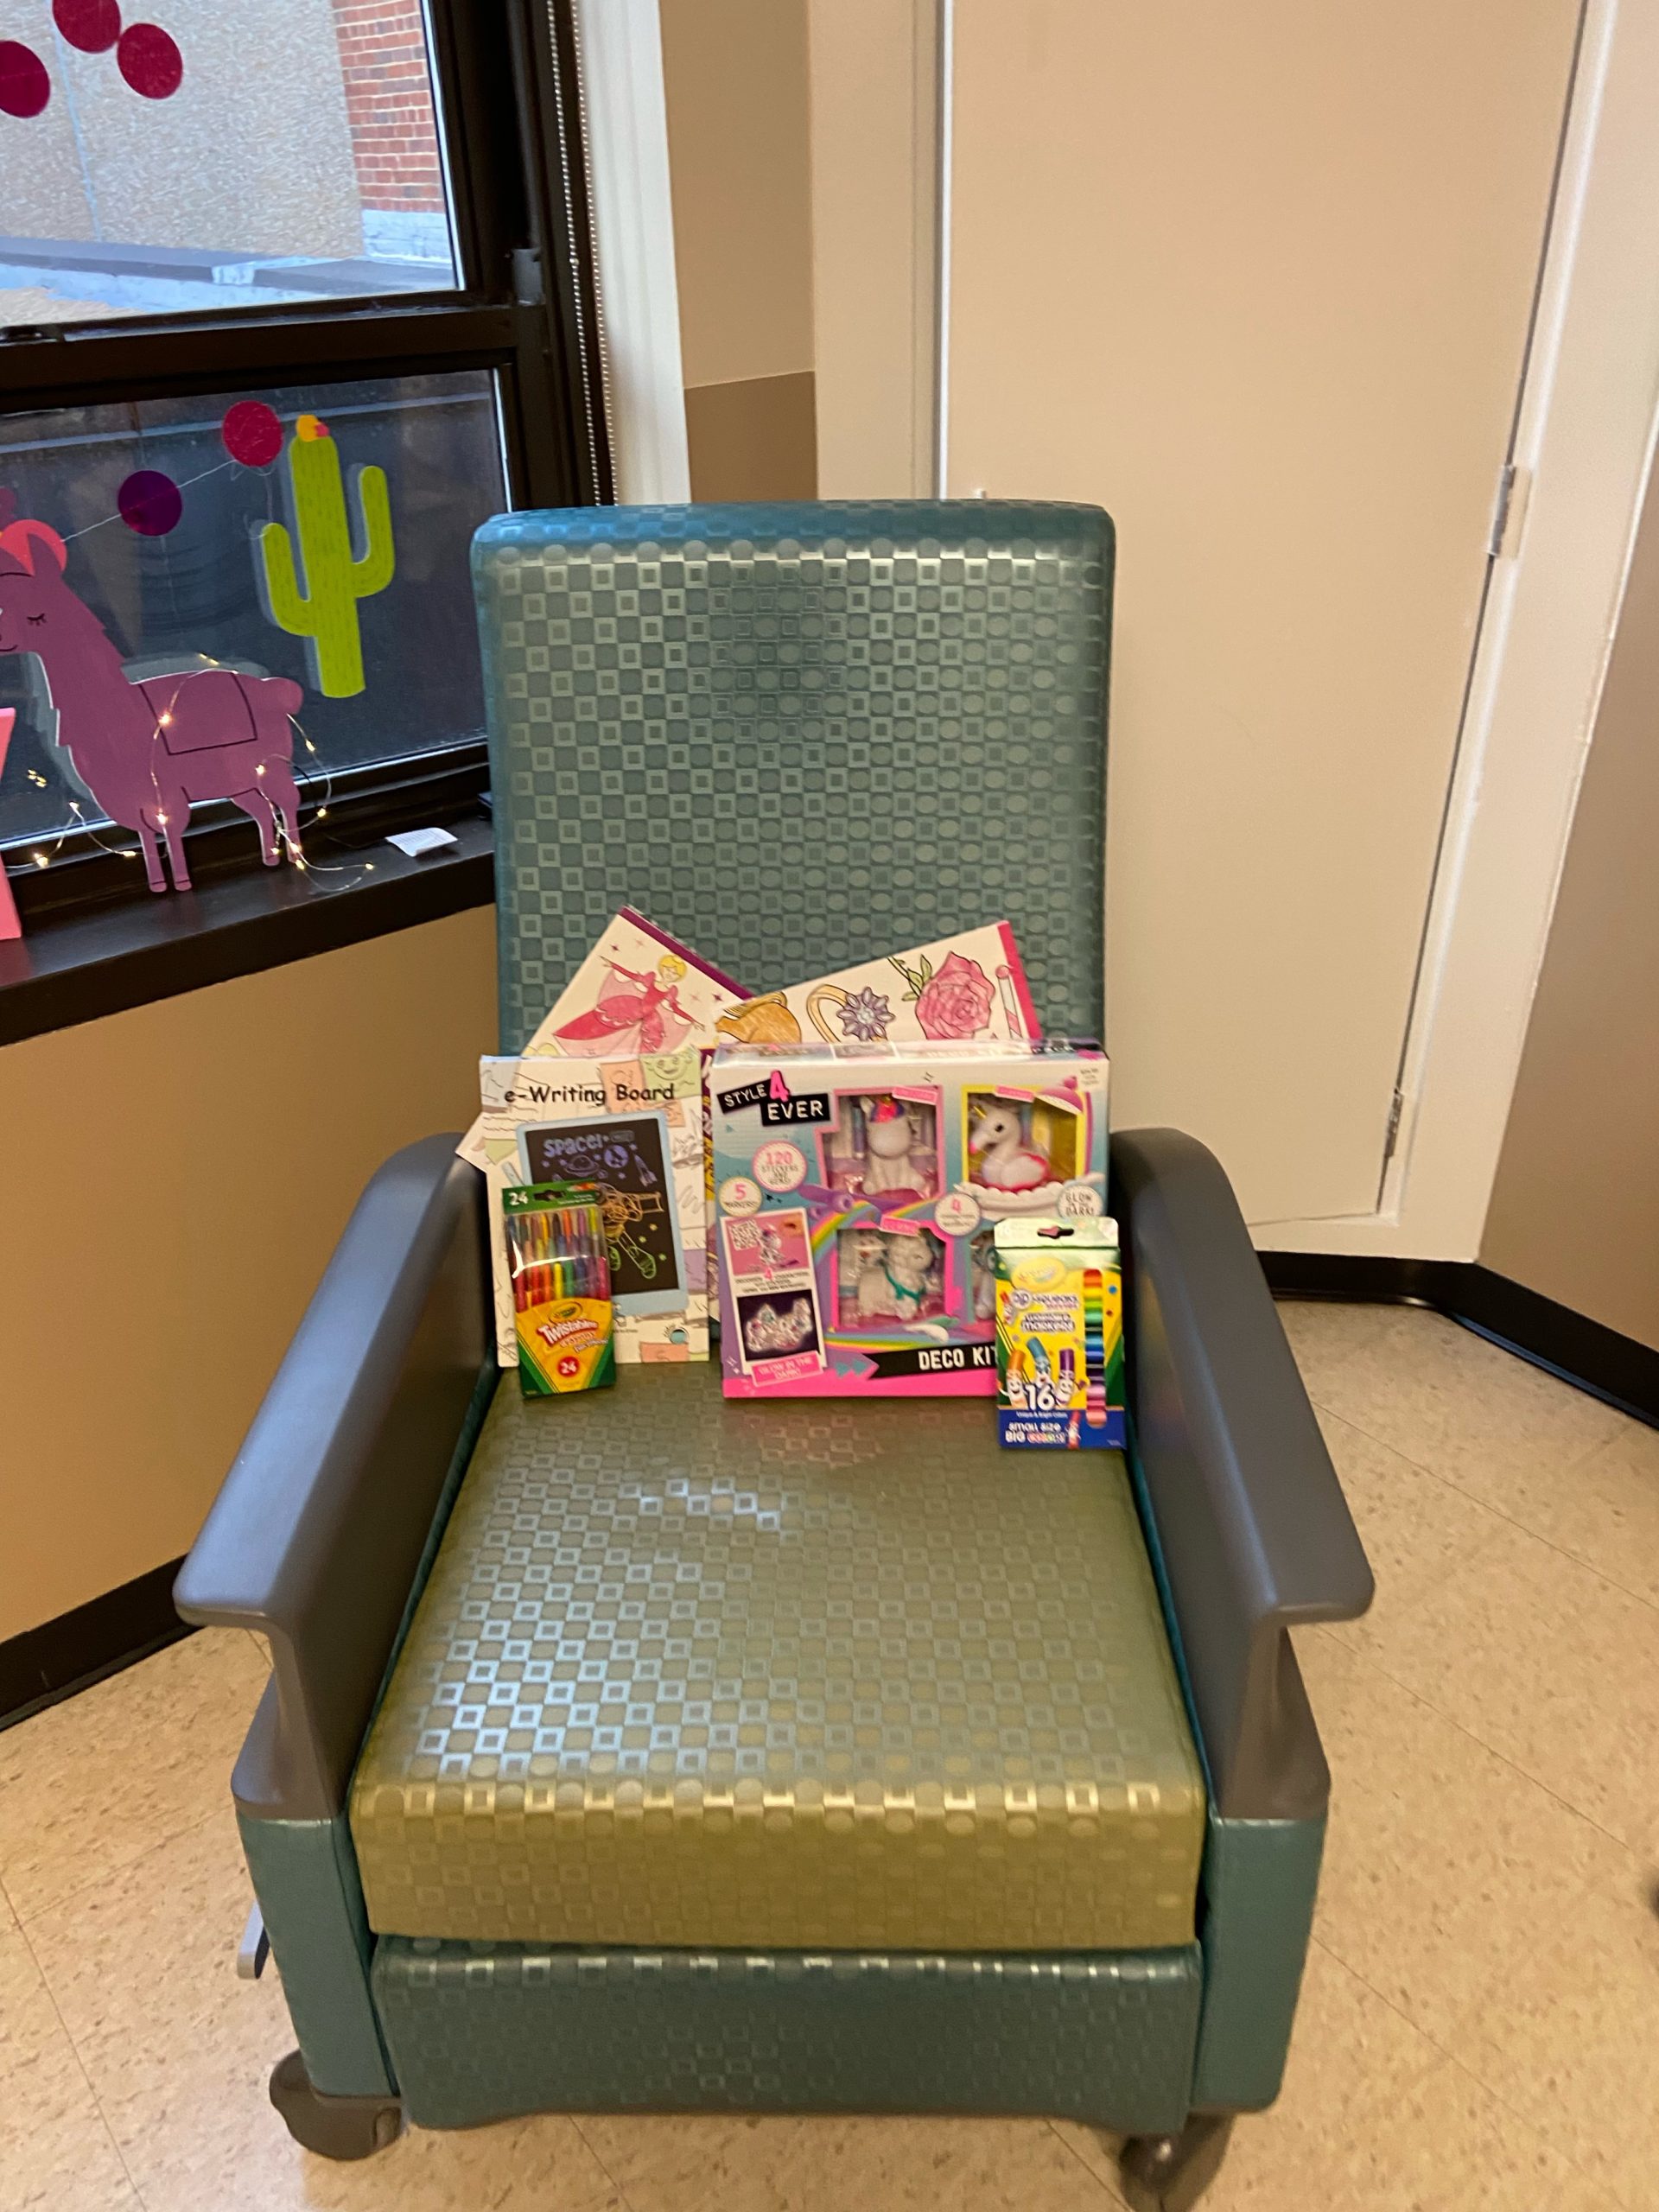 sitting on the seat of a green chair is a pile of activity books